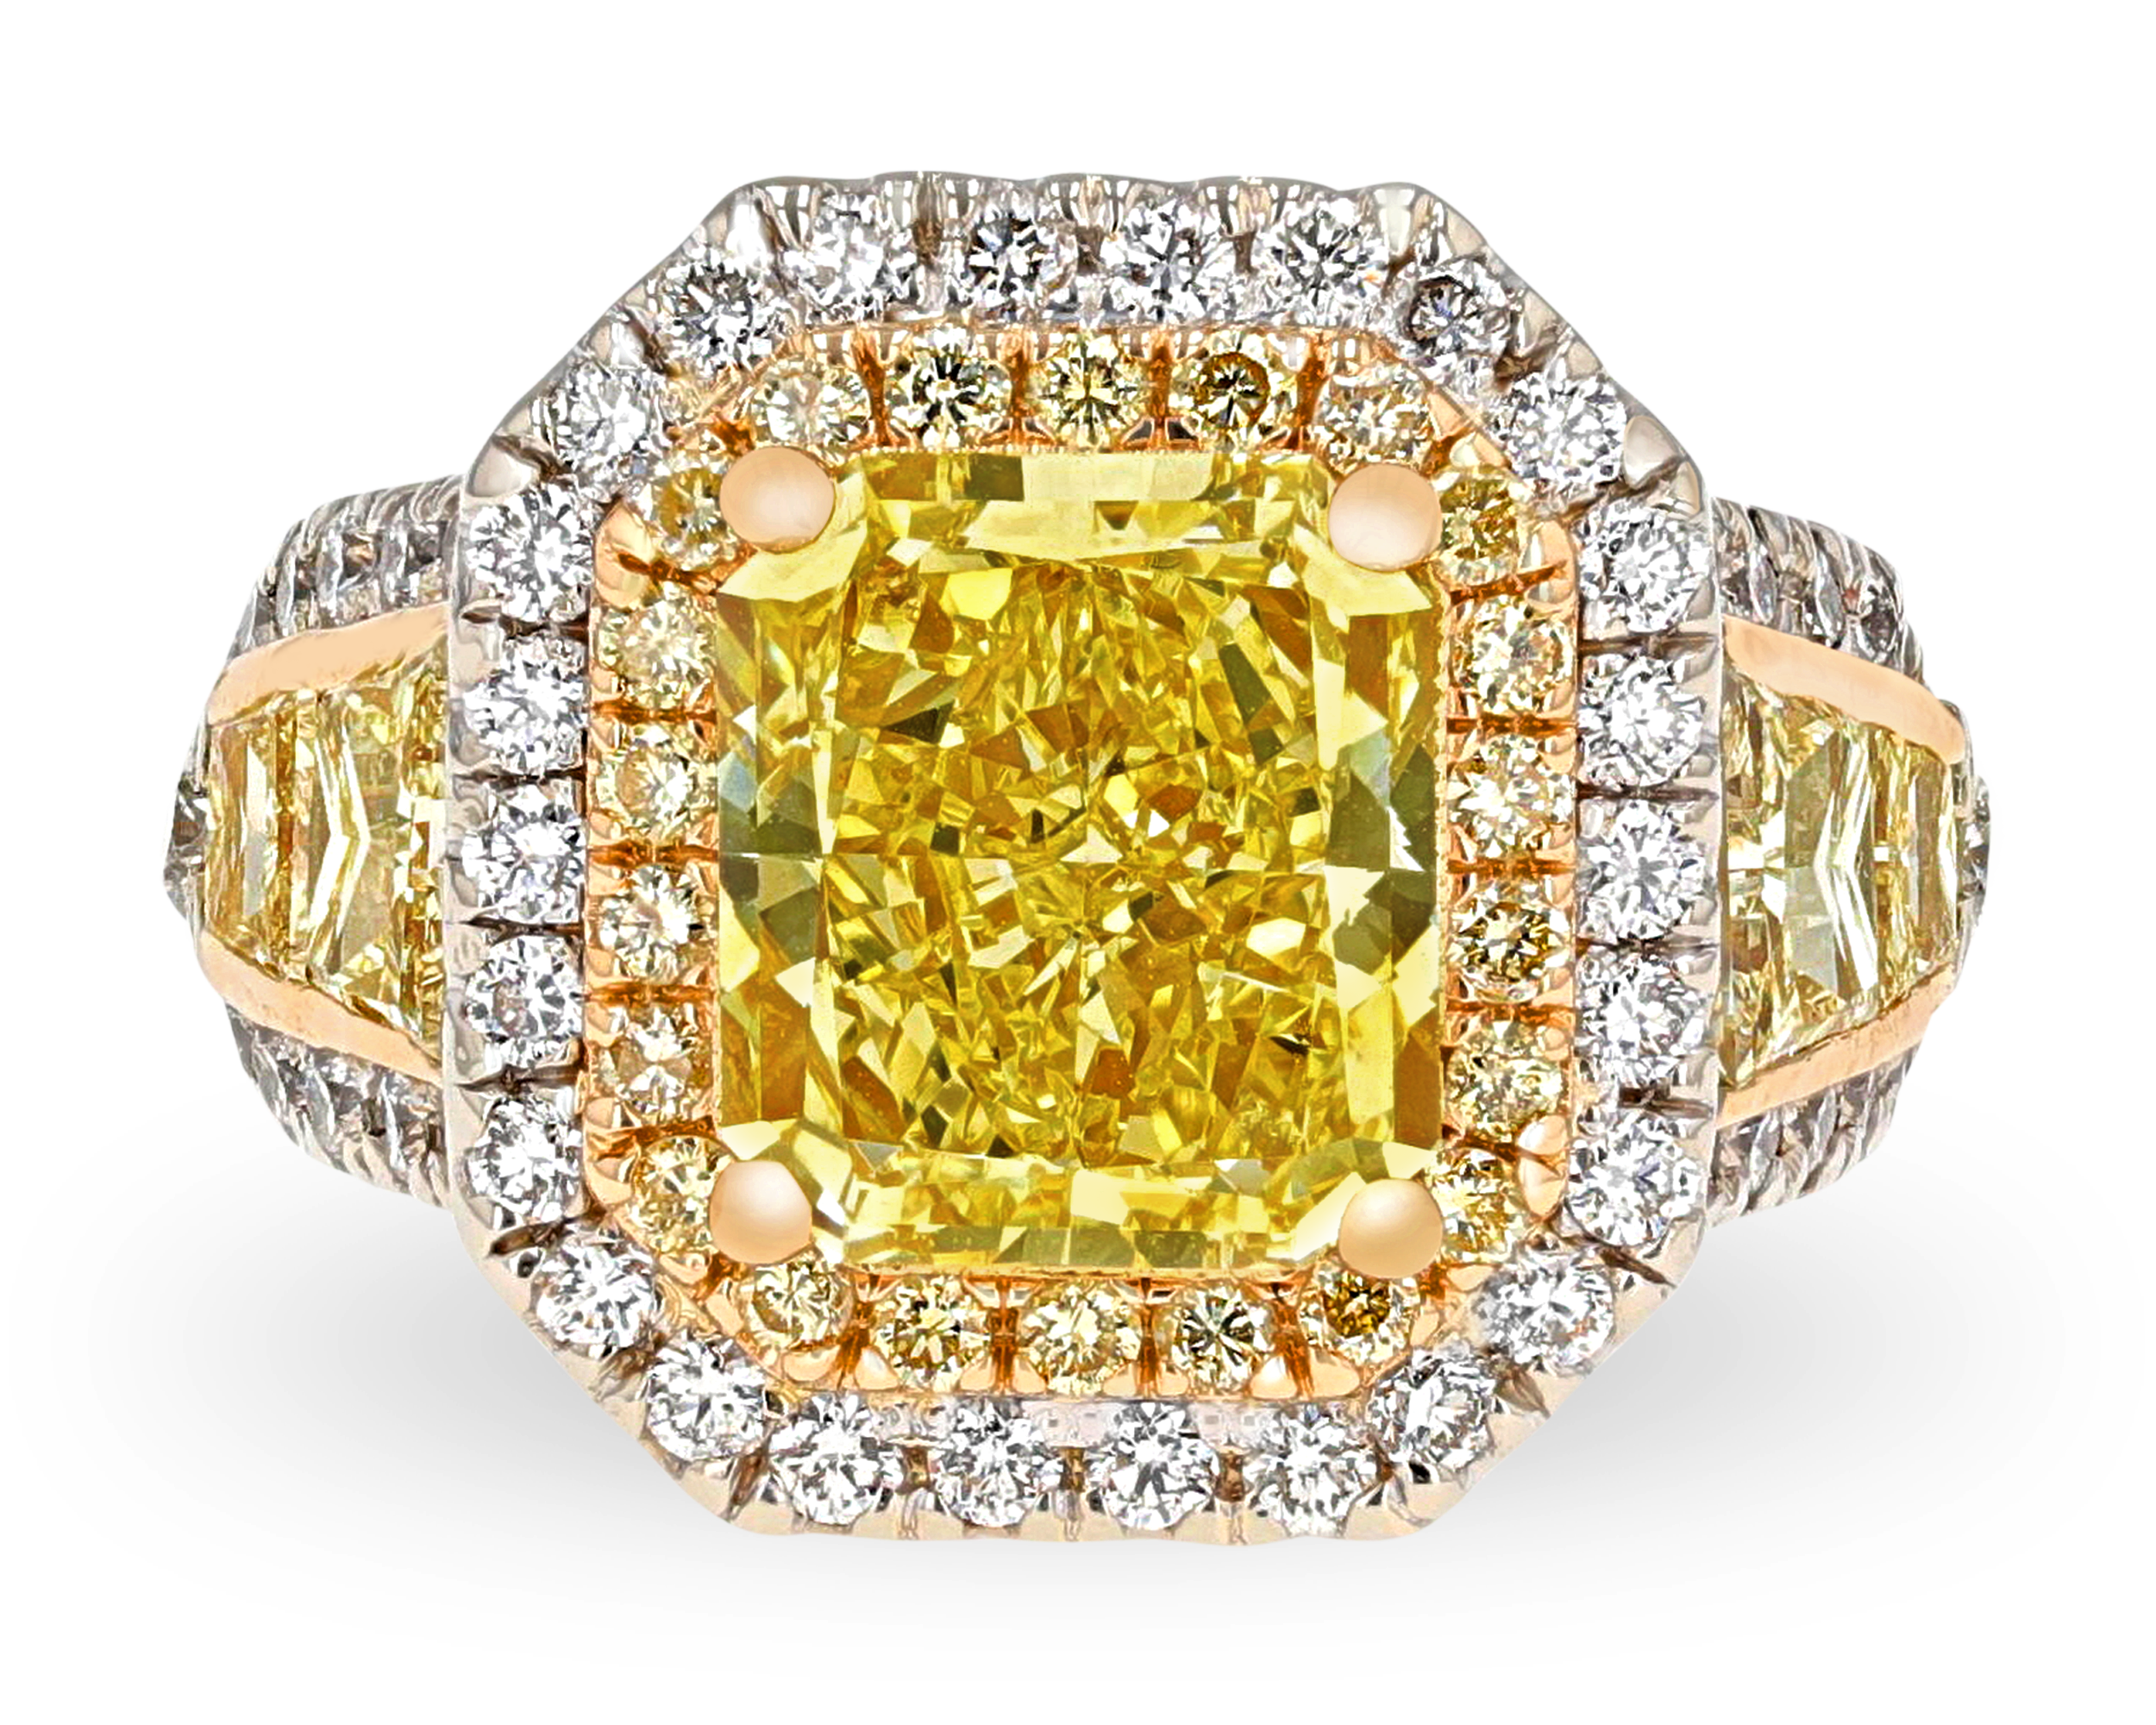 7. "Yellow Diamond Ring? These Nail Colors Will Complete the Look" - wide 6